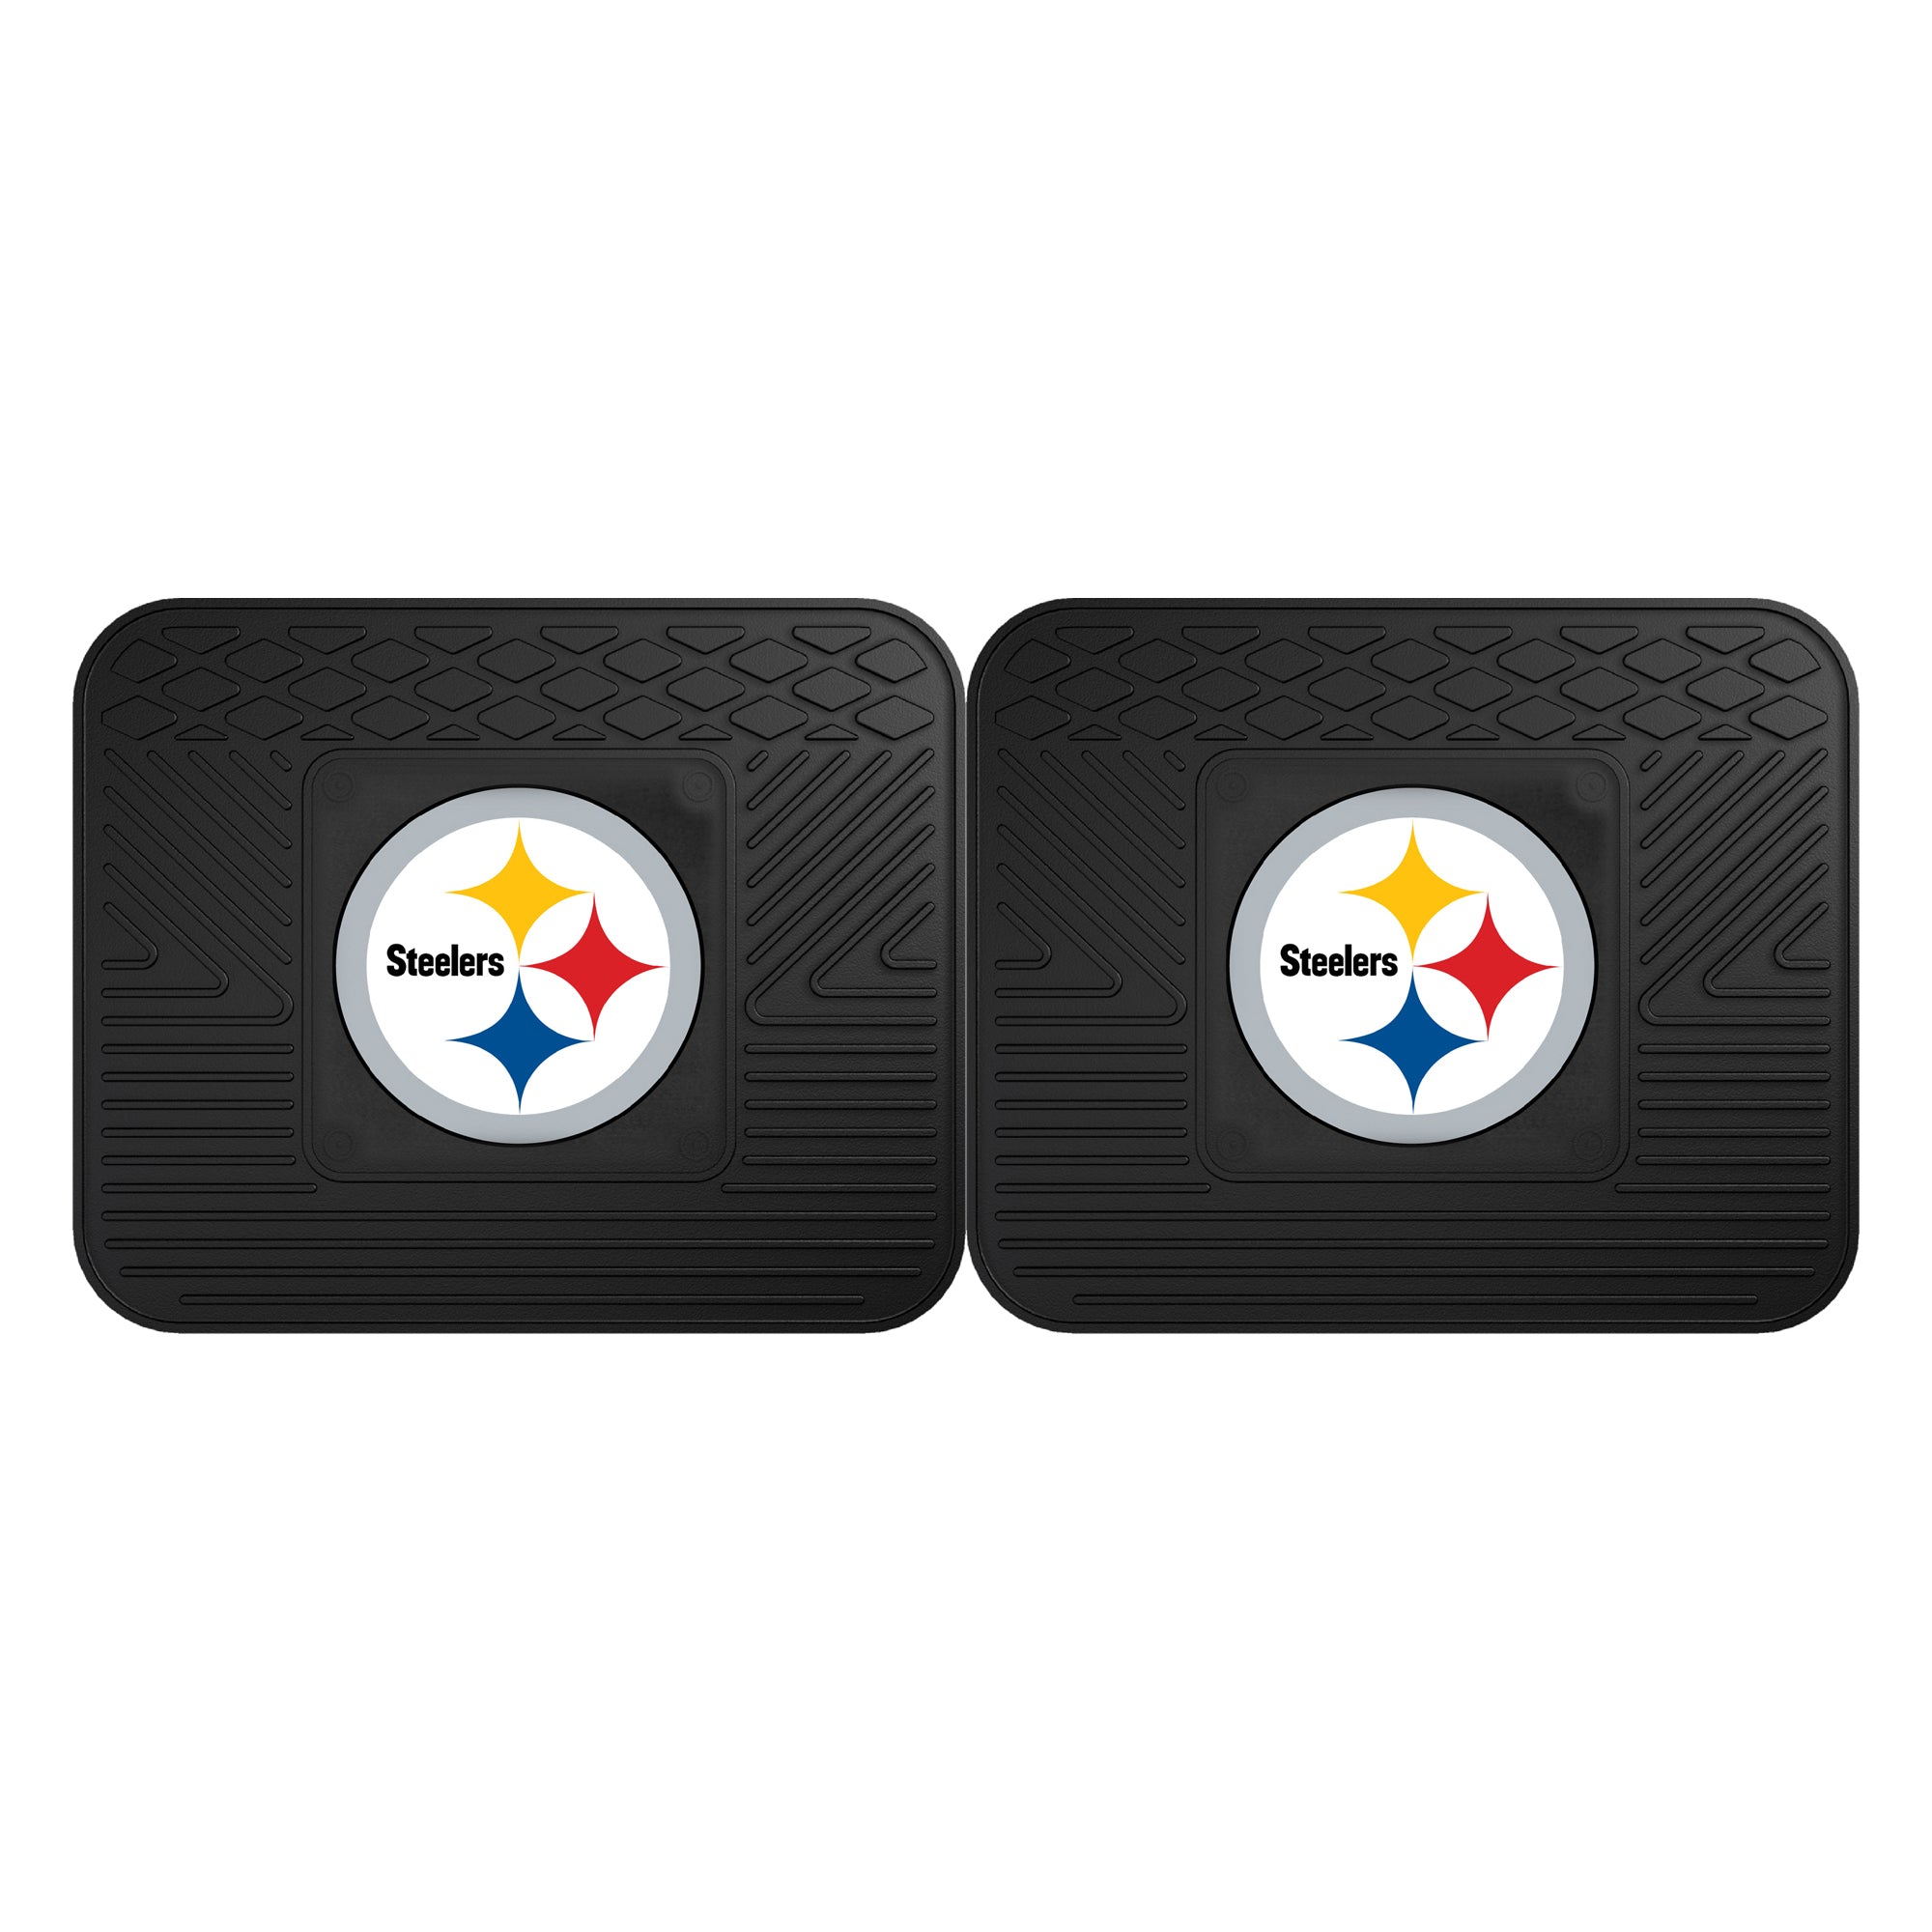 NFL - Pittsburgh Steelers 2 Utility Mats